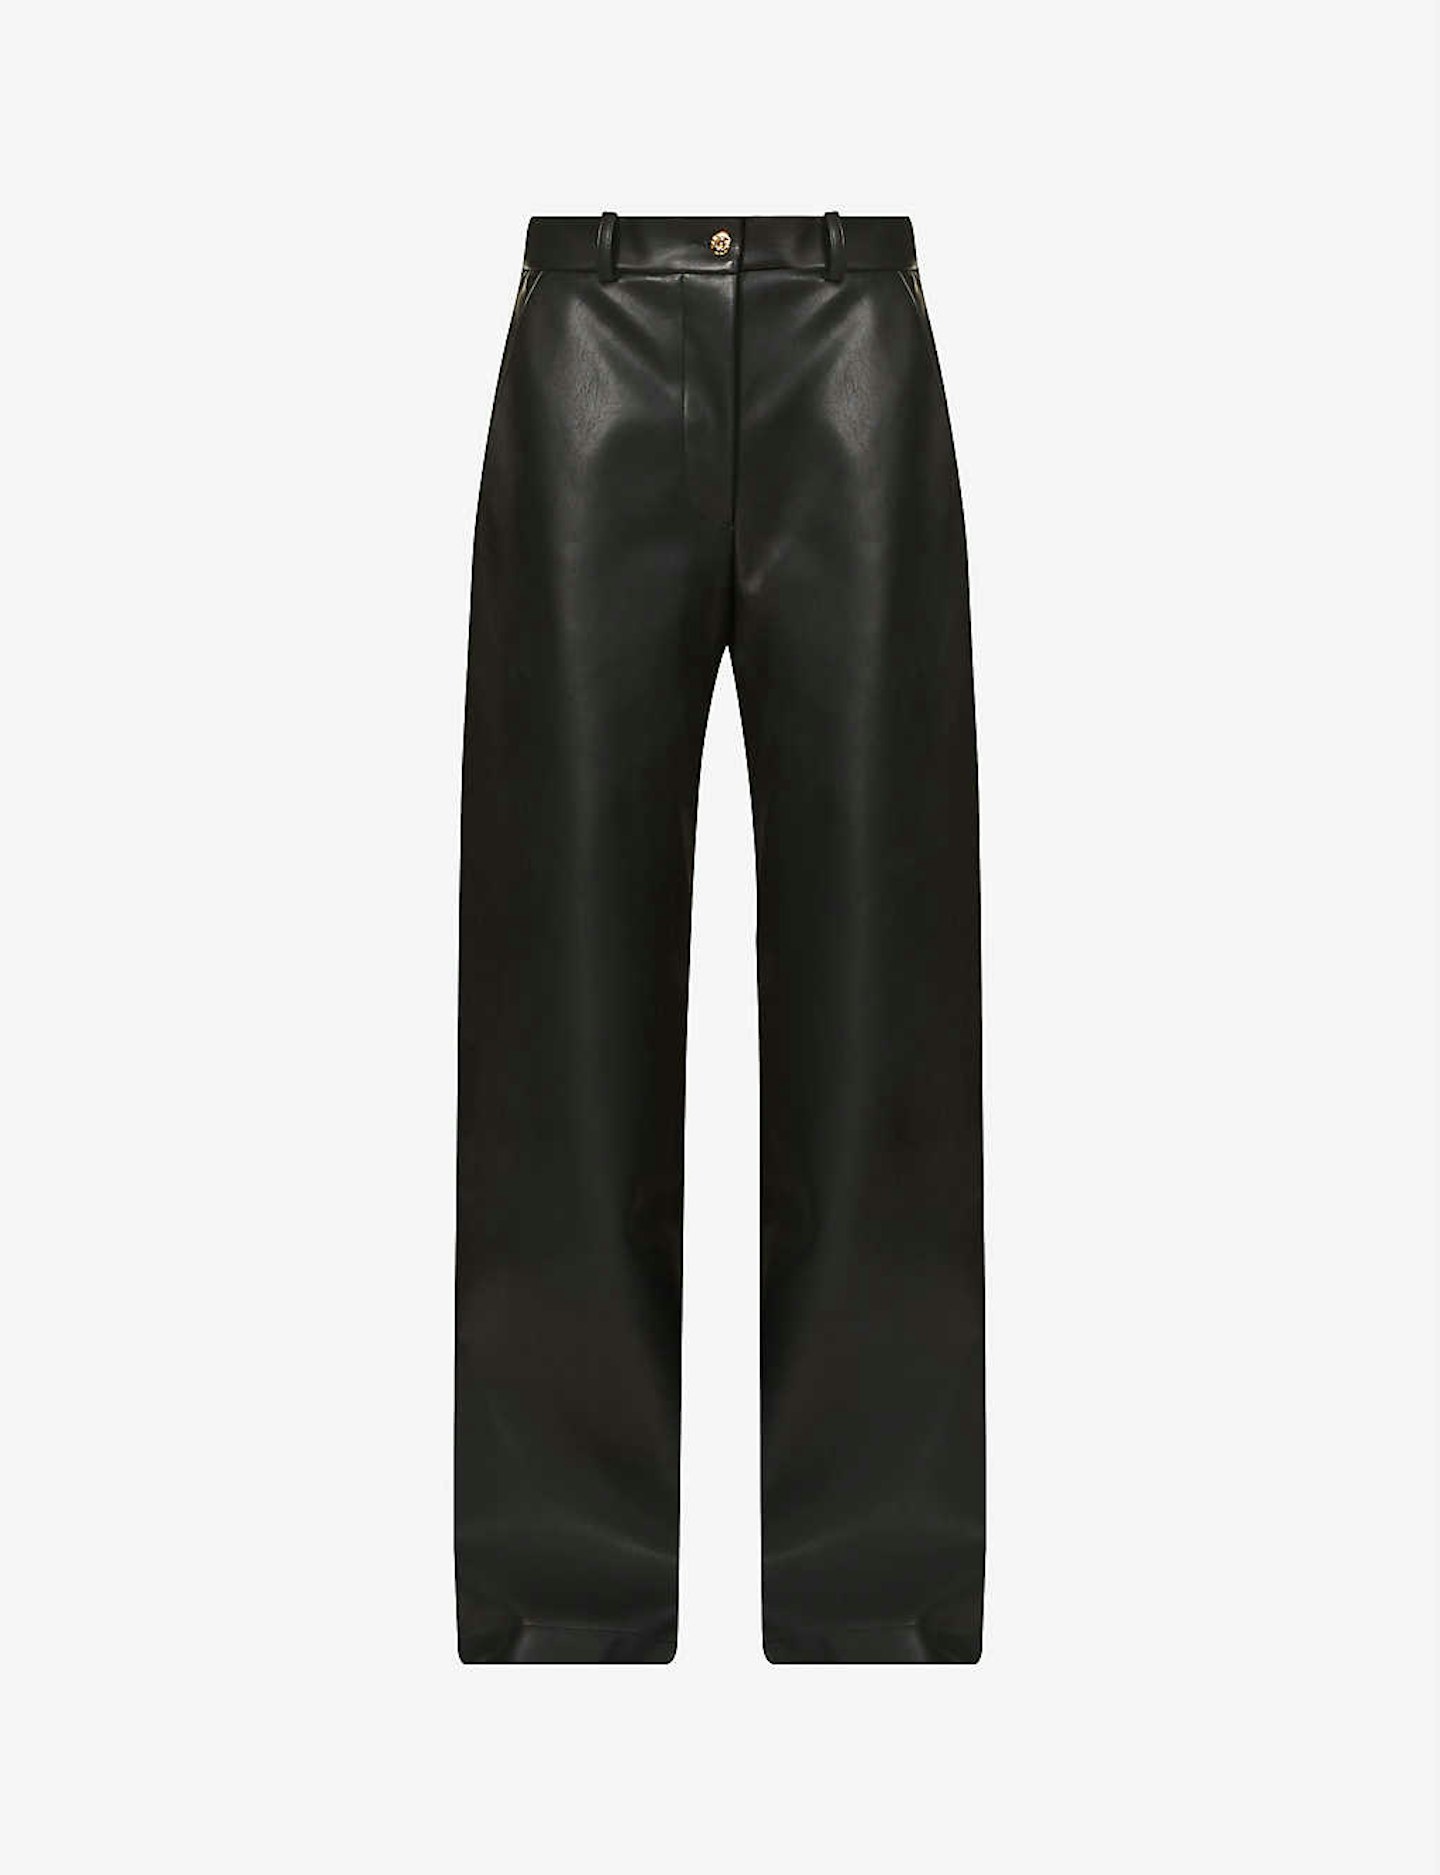 Patou, Iconic Faux-Leather Wide-Leg Trousers, £450